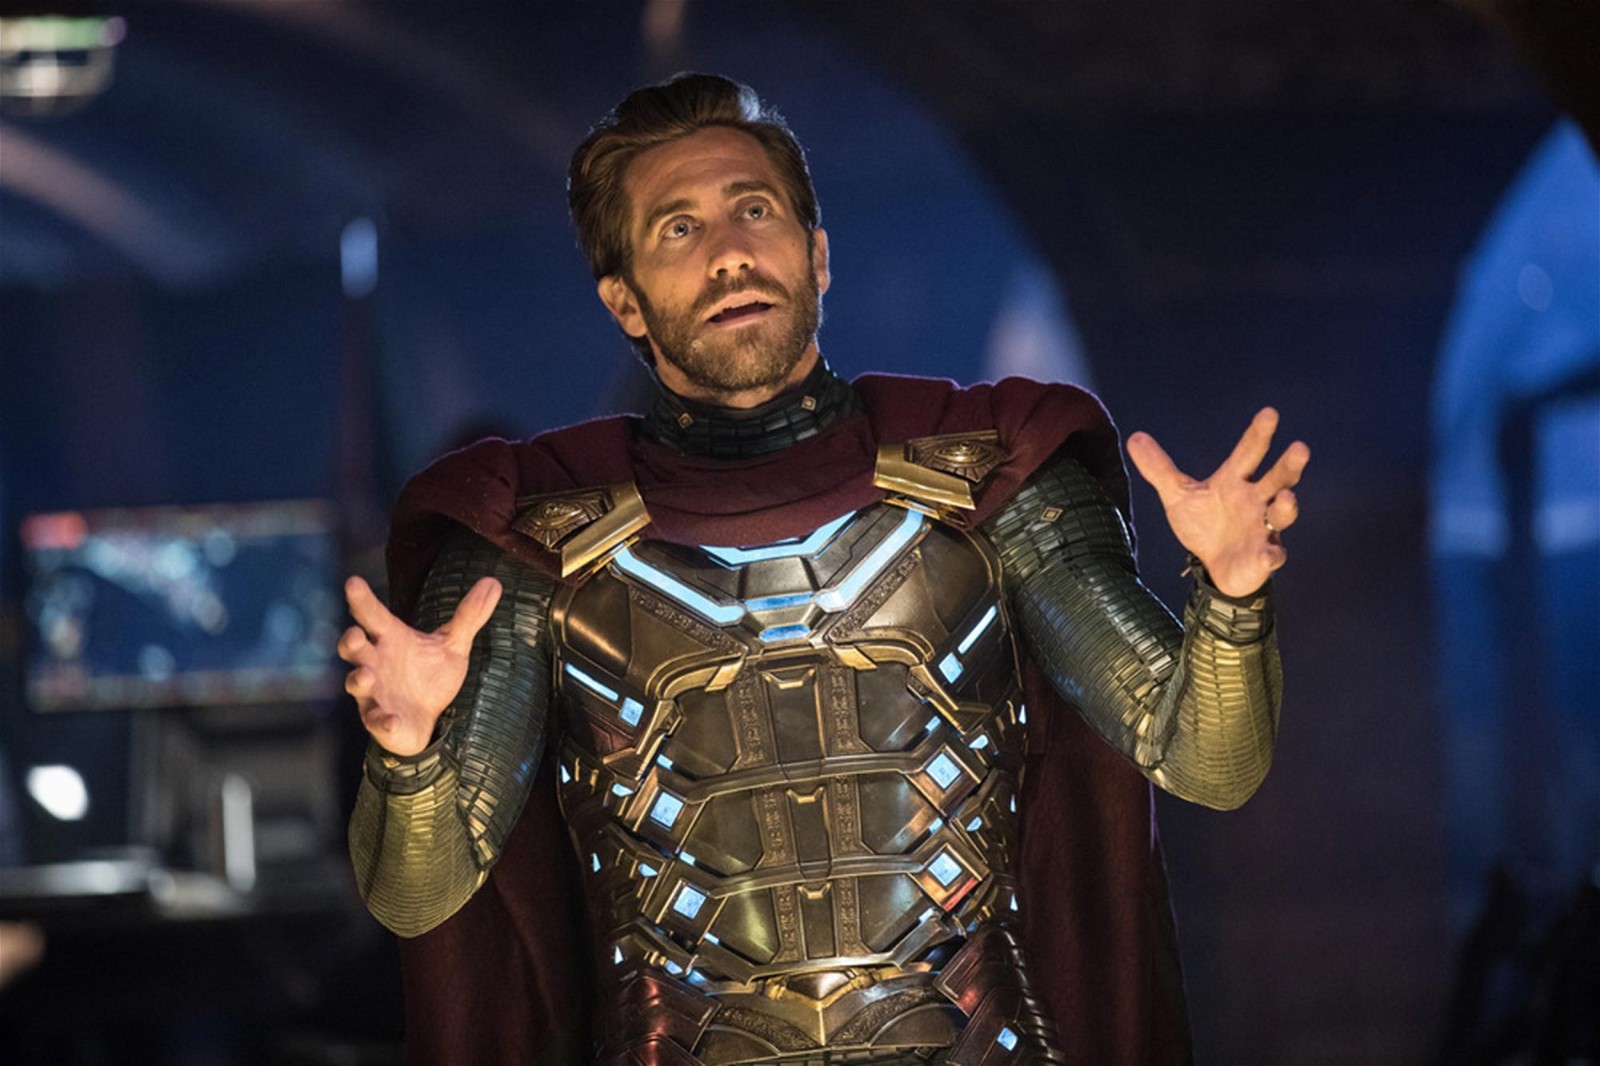 Jake Gyllenhaal as Mysterio in a still from Spider-Man: Far From Home 